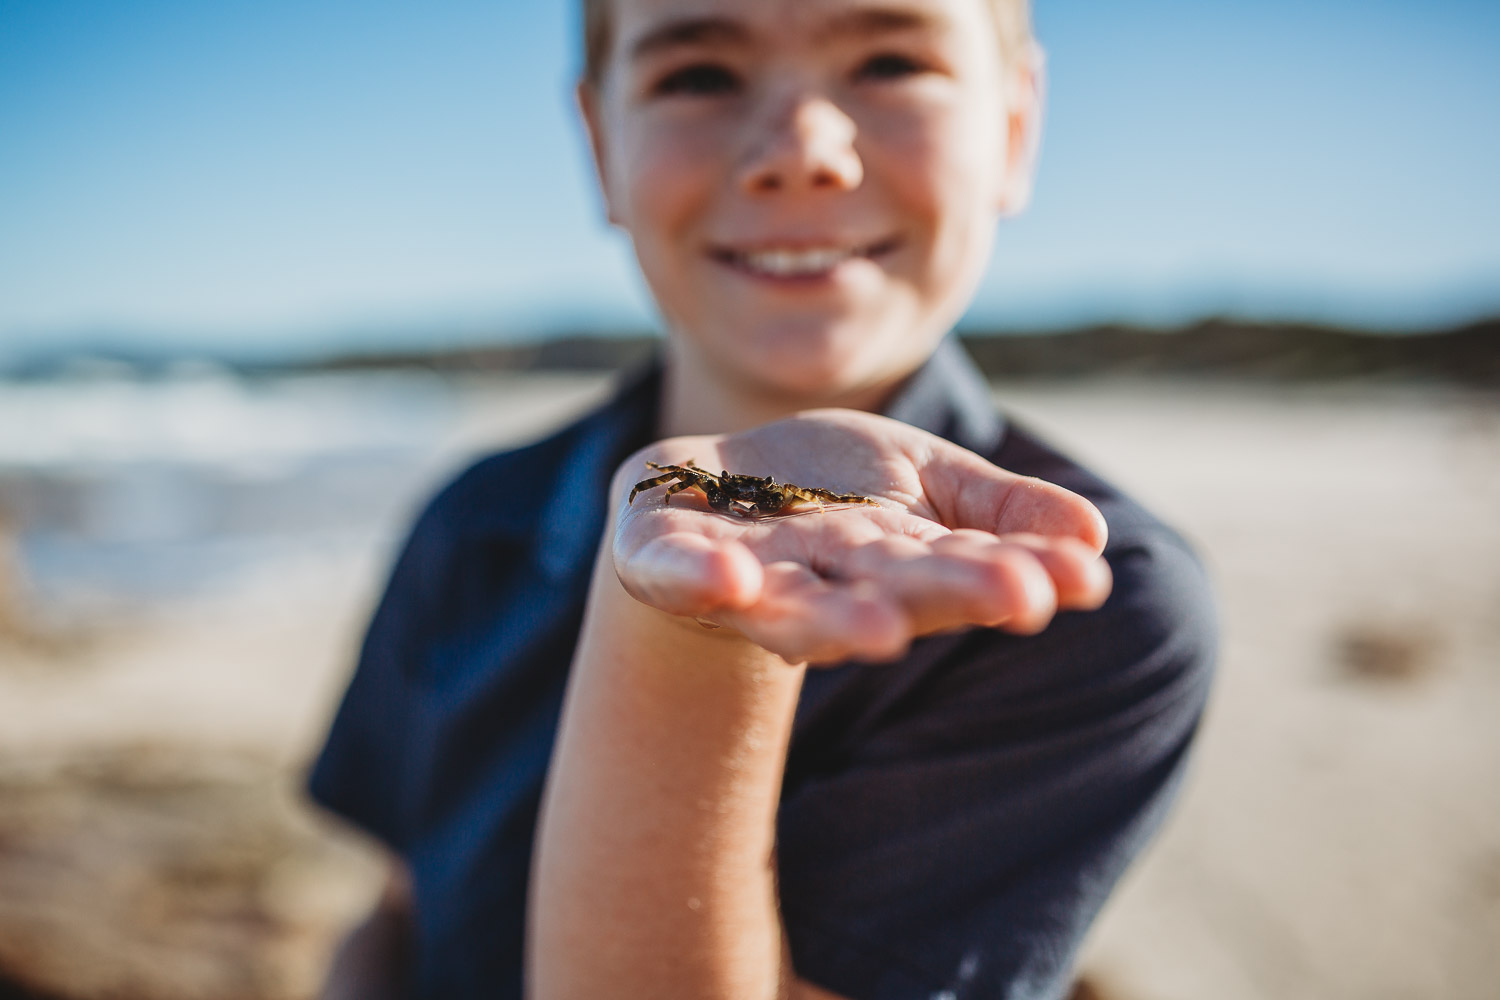 Young boy smiling holding small crab at the beach